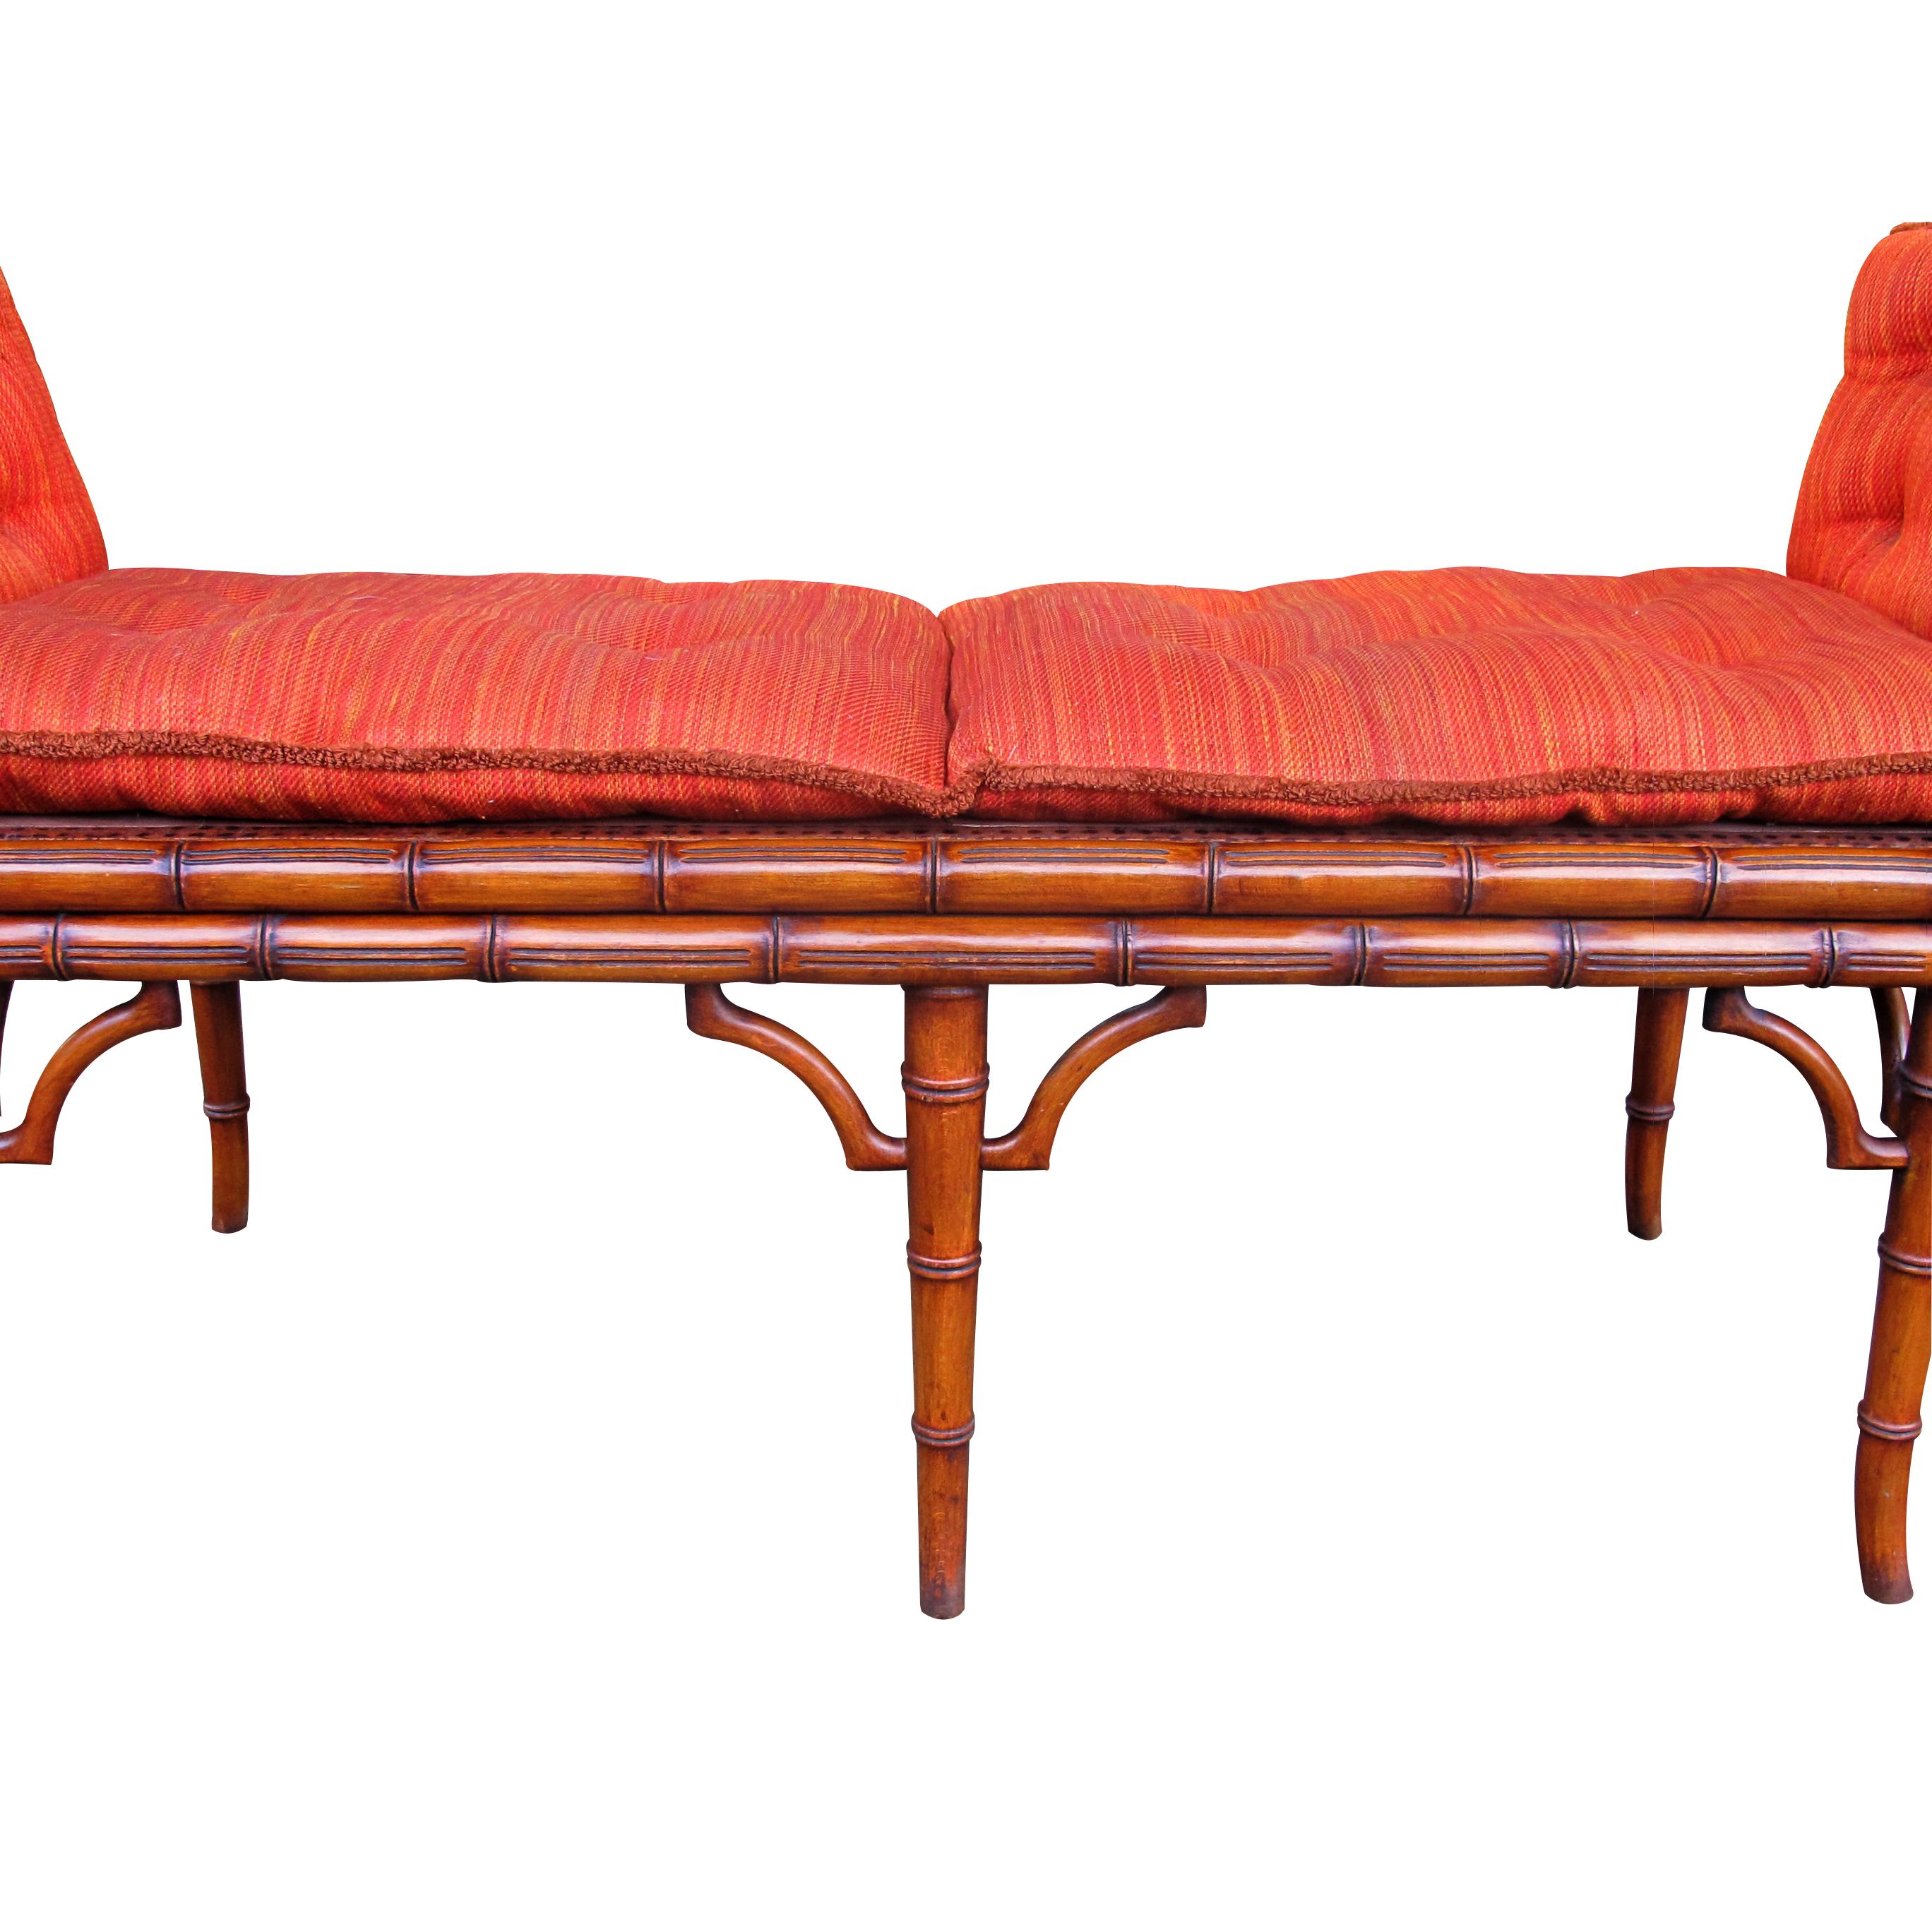 Mid-20th Century Italian 1940s Cane and Faux Bamboo Frame Bench with its Original Upholstery For Sale